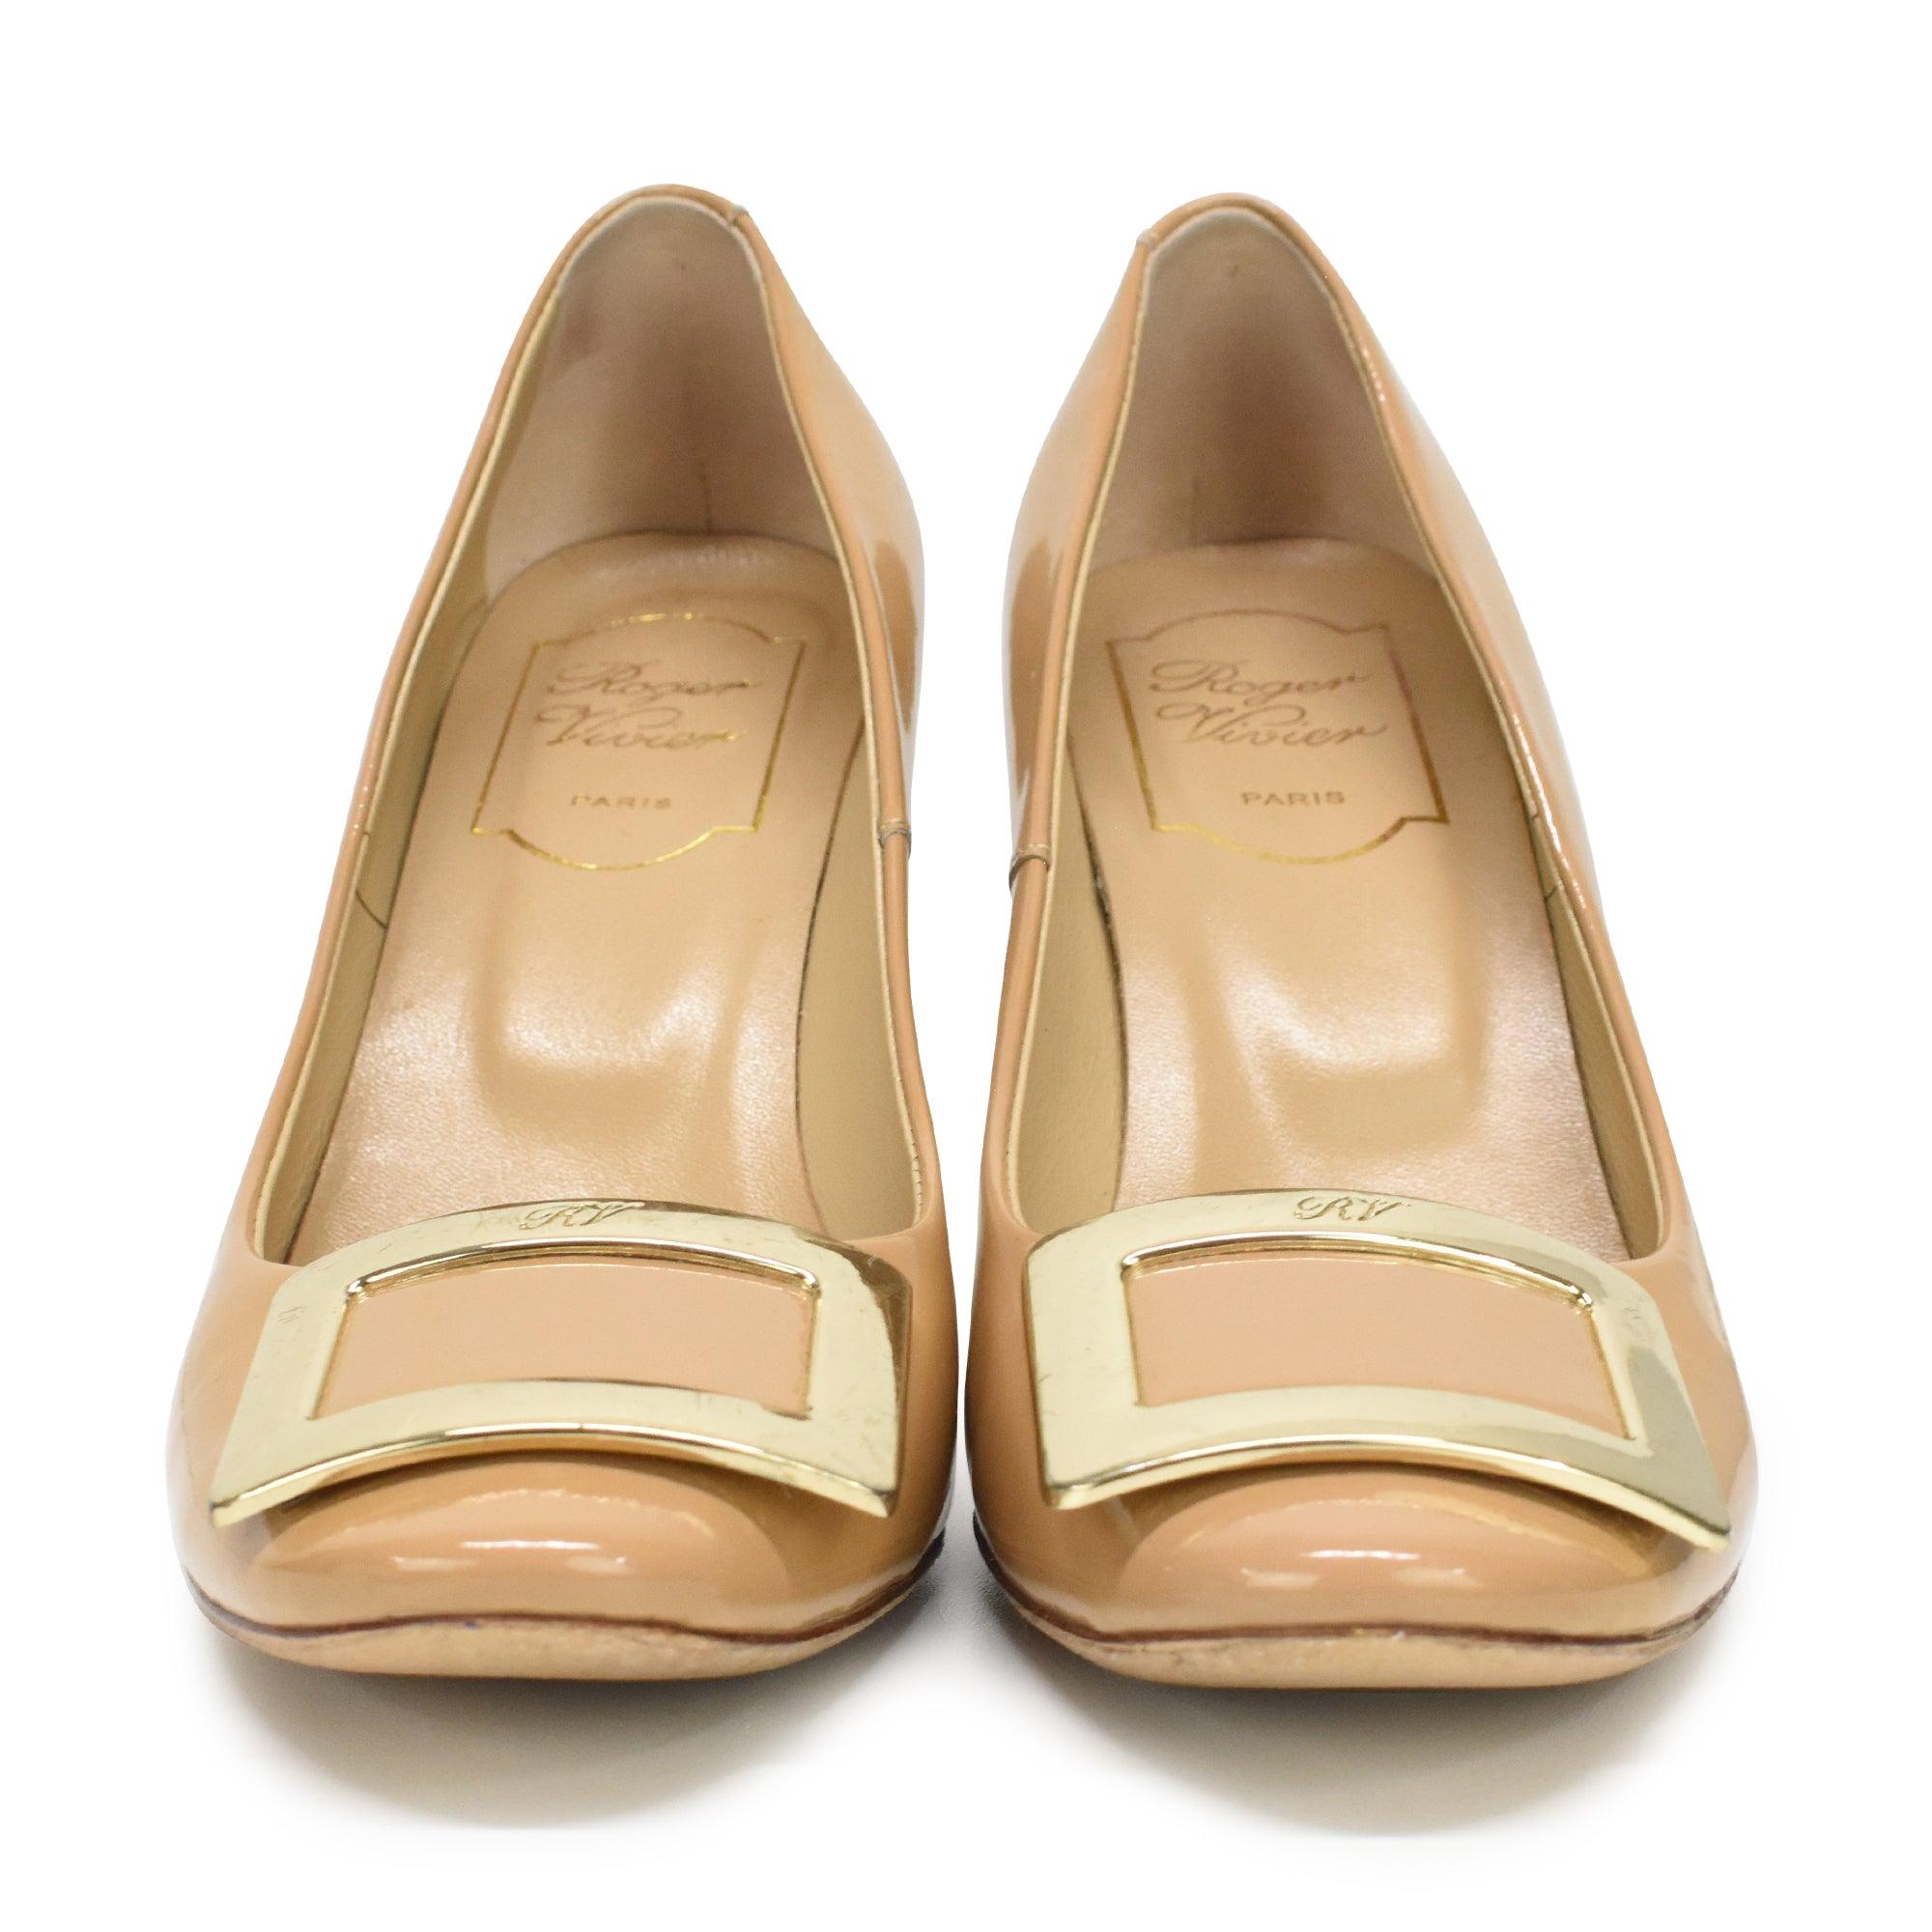 Roger Vivier Pumps - Women's 35 - Fashionably Yours